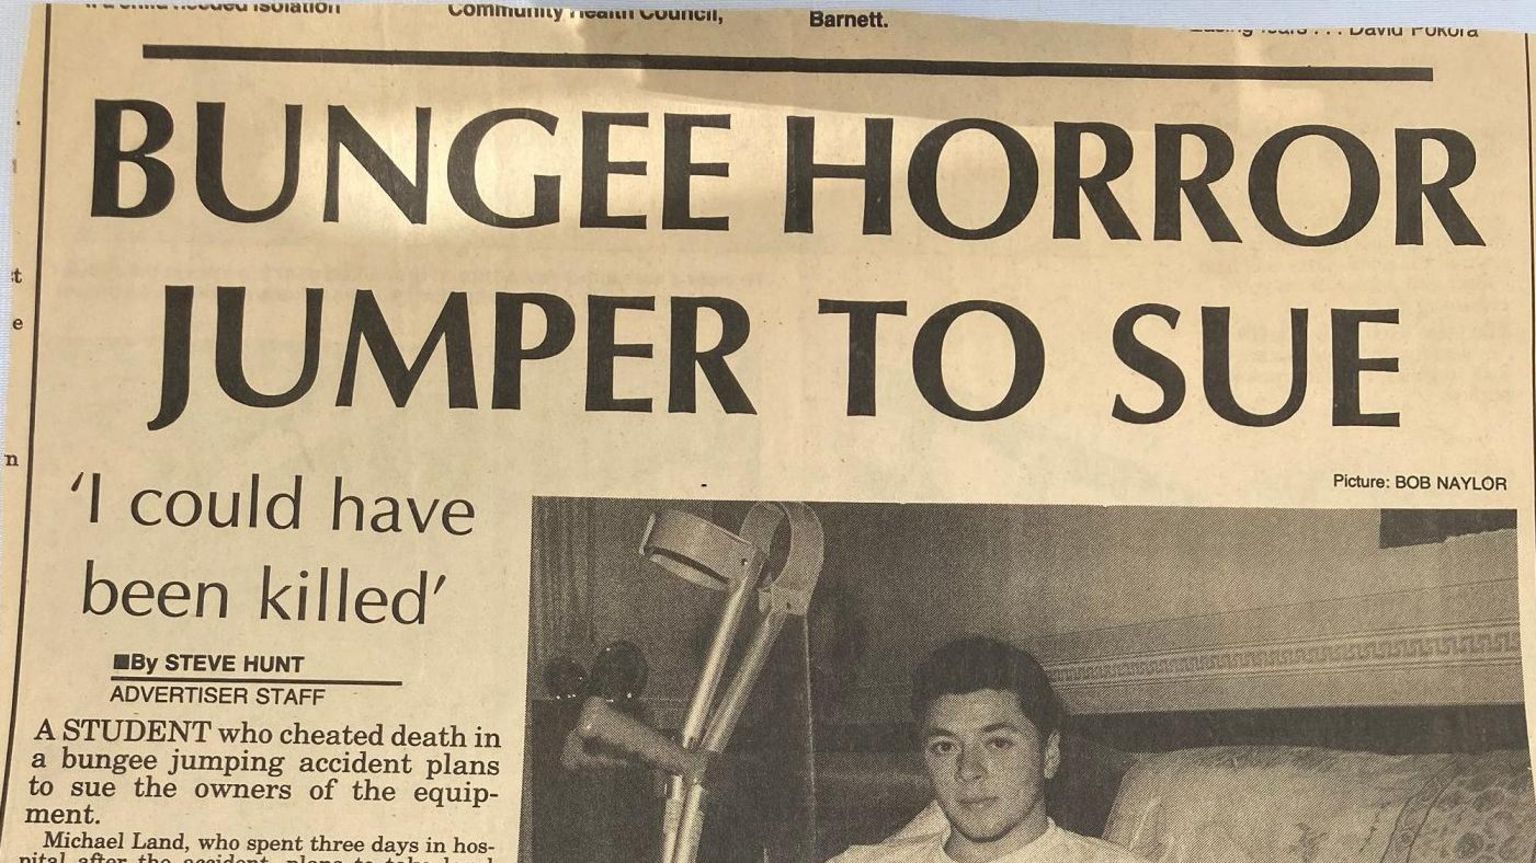 A picture of a newspaper clipping showing Mike shortly after the accident. The headline reads "bungee horror jumper to sue", and includes a large picture of Mike sat on a sofa with a serious expression, holding a pair of crutches. 